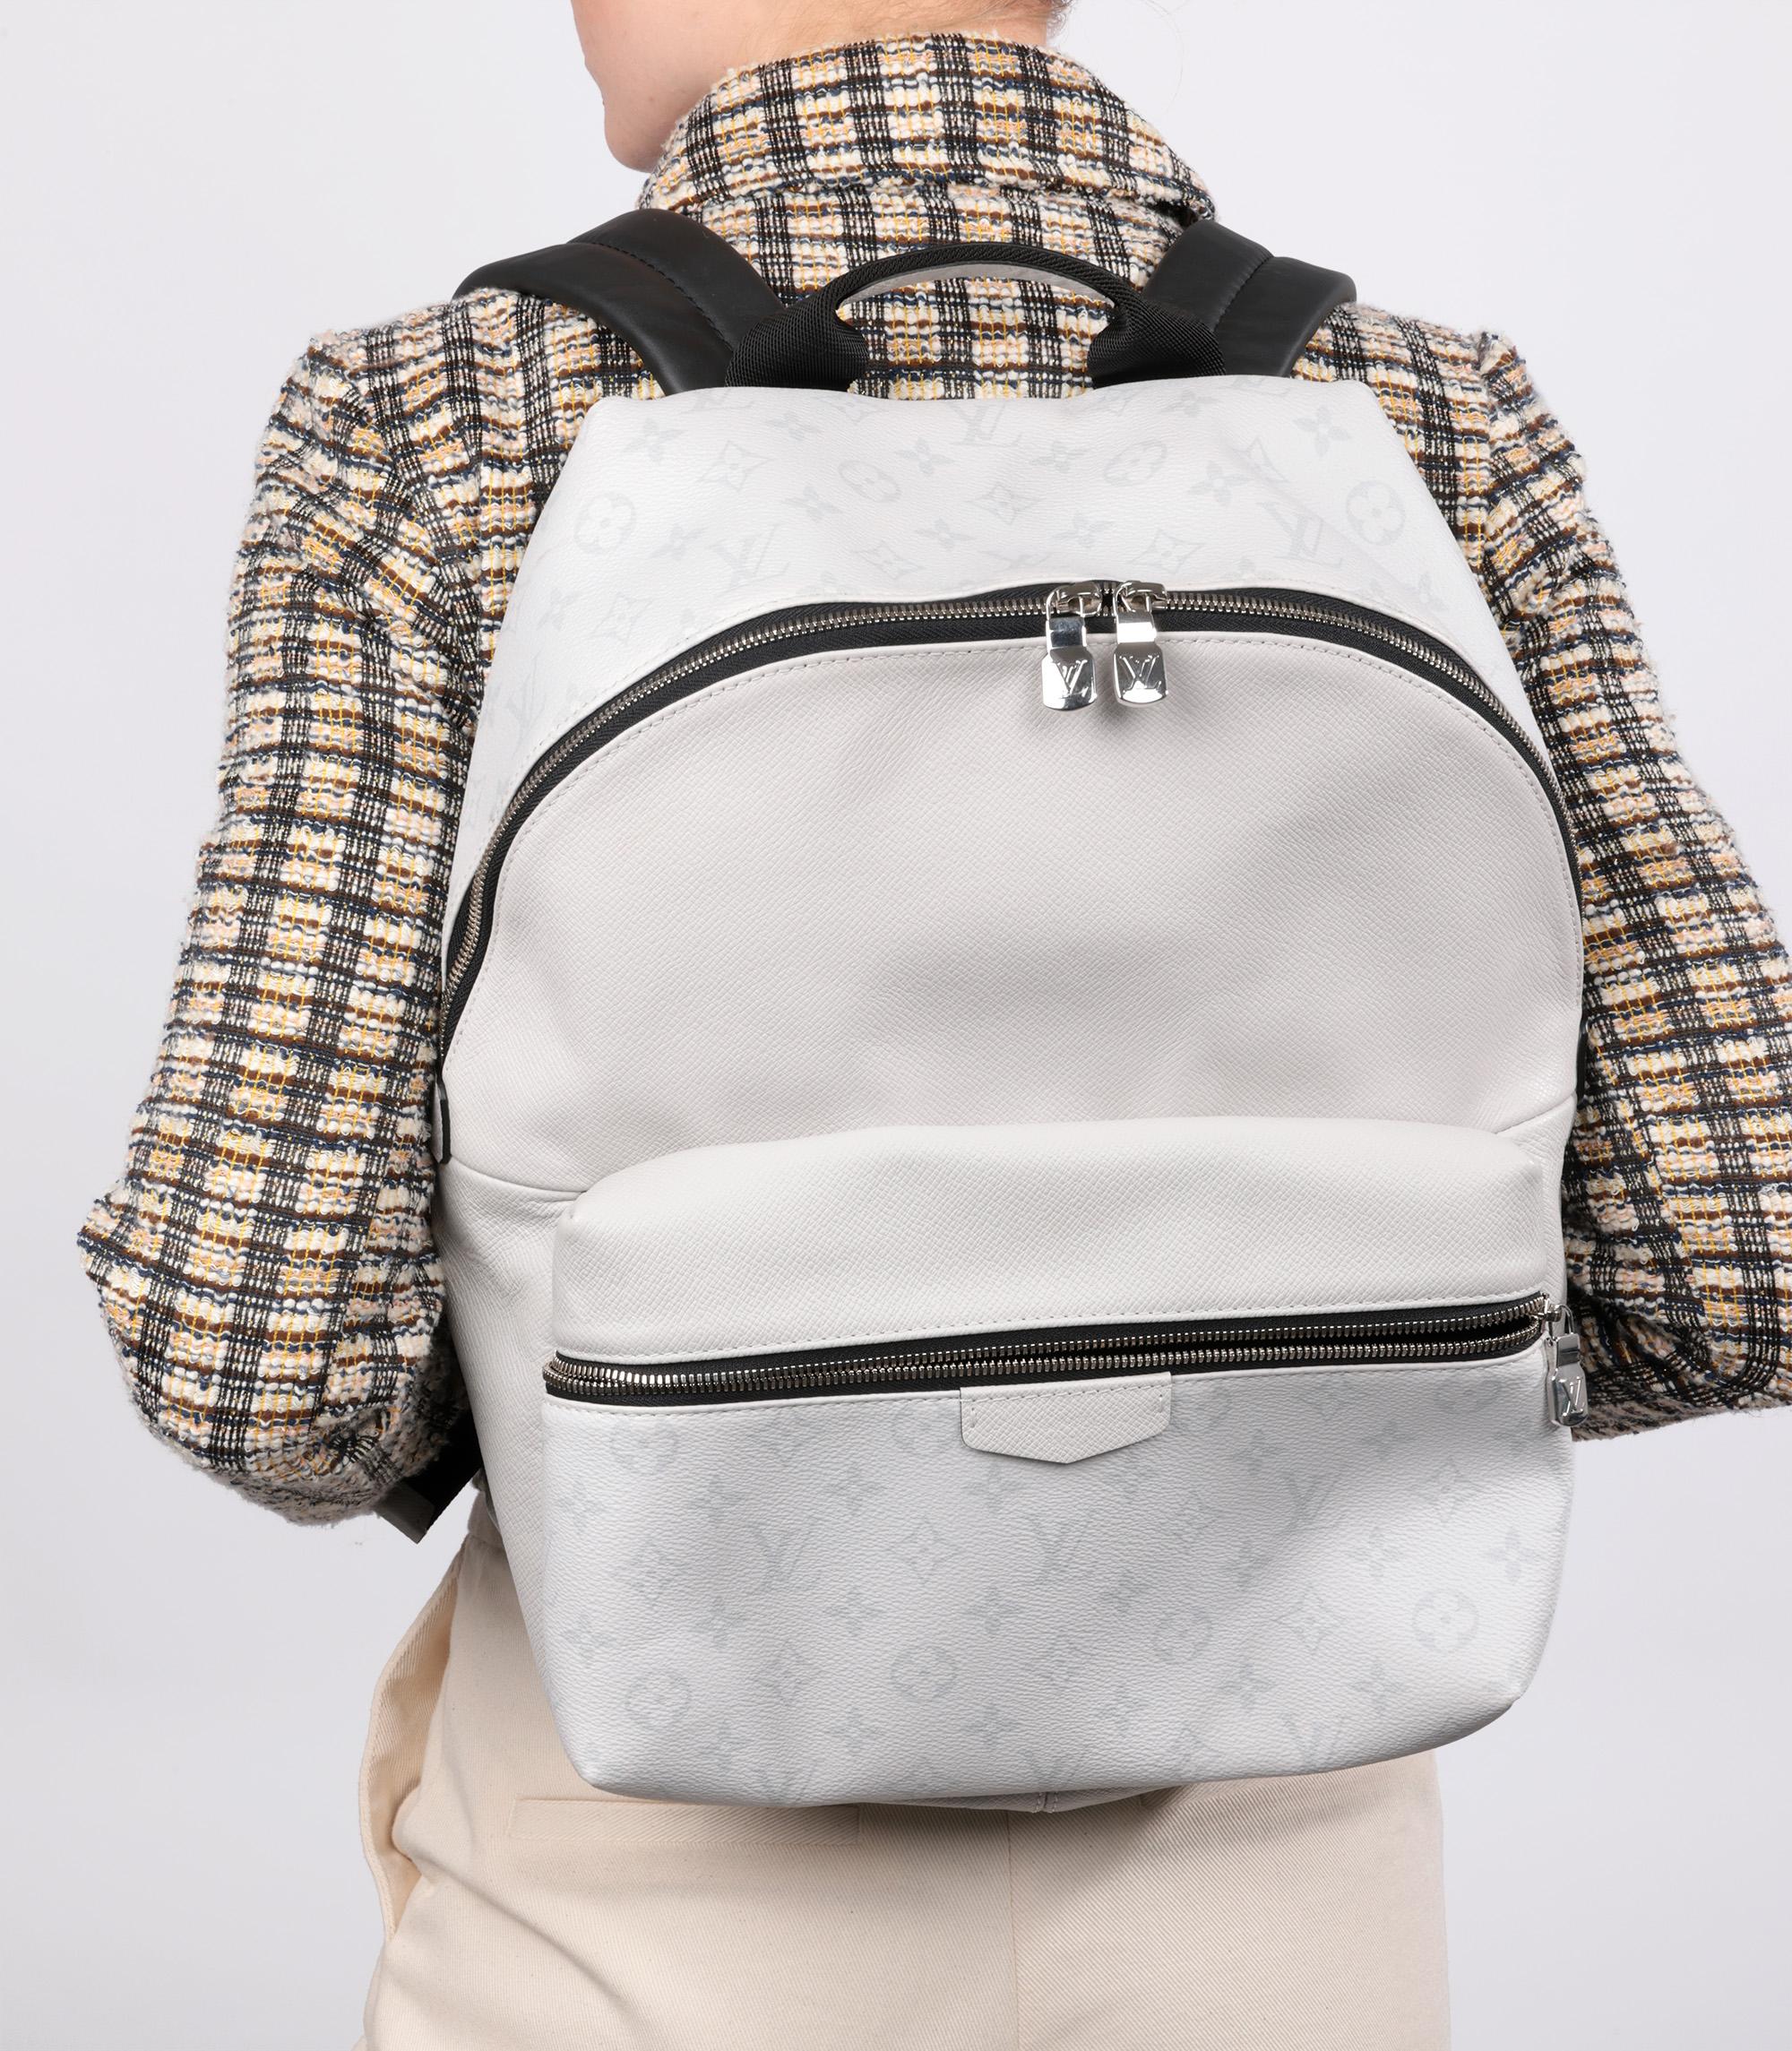 Louis Vuitton Optic White Coated Canvas & Taiga Leather Virgil Abloh Discovery Backpack

Brand- Louis Vuitton
Model- Discovery Backpack
Product Type- Backpack
Age- Circa 2022
Accompanied By- Louis Vuitton Dust Bag
Colour- White
Hardware-